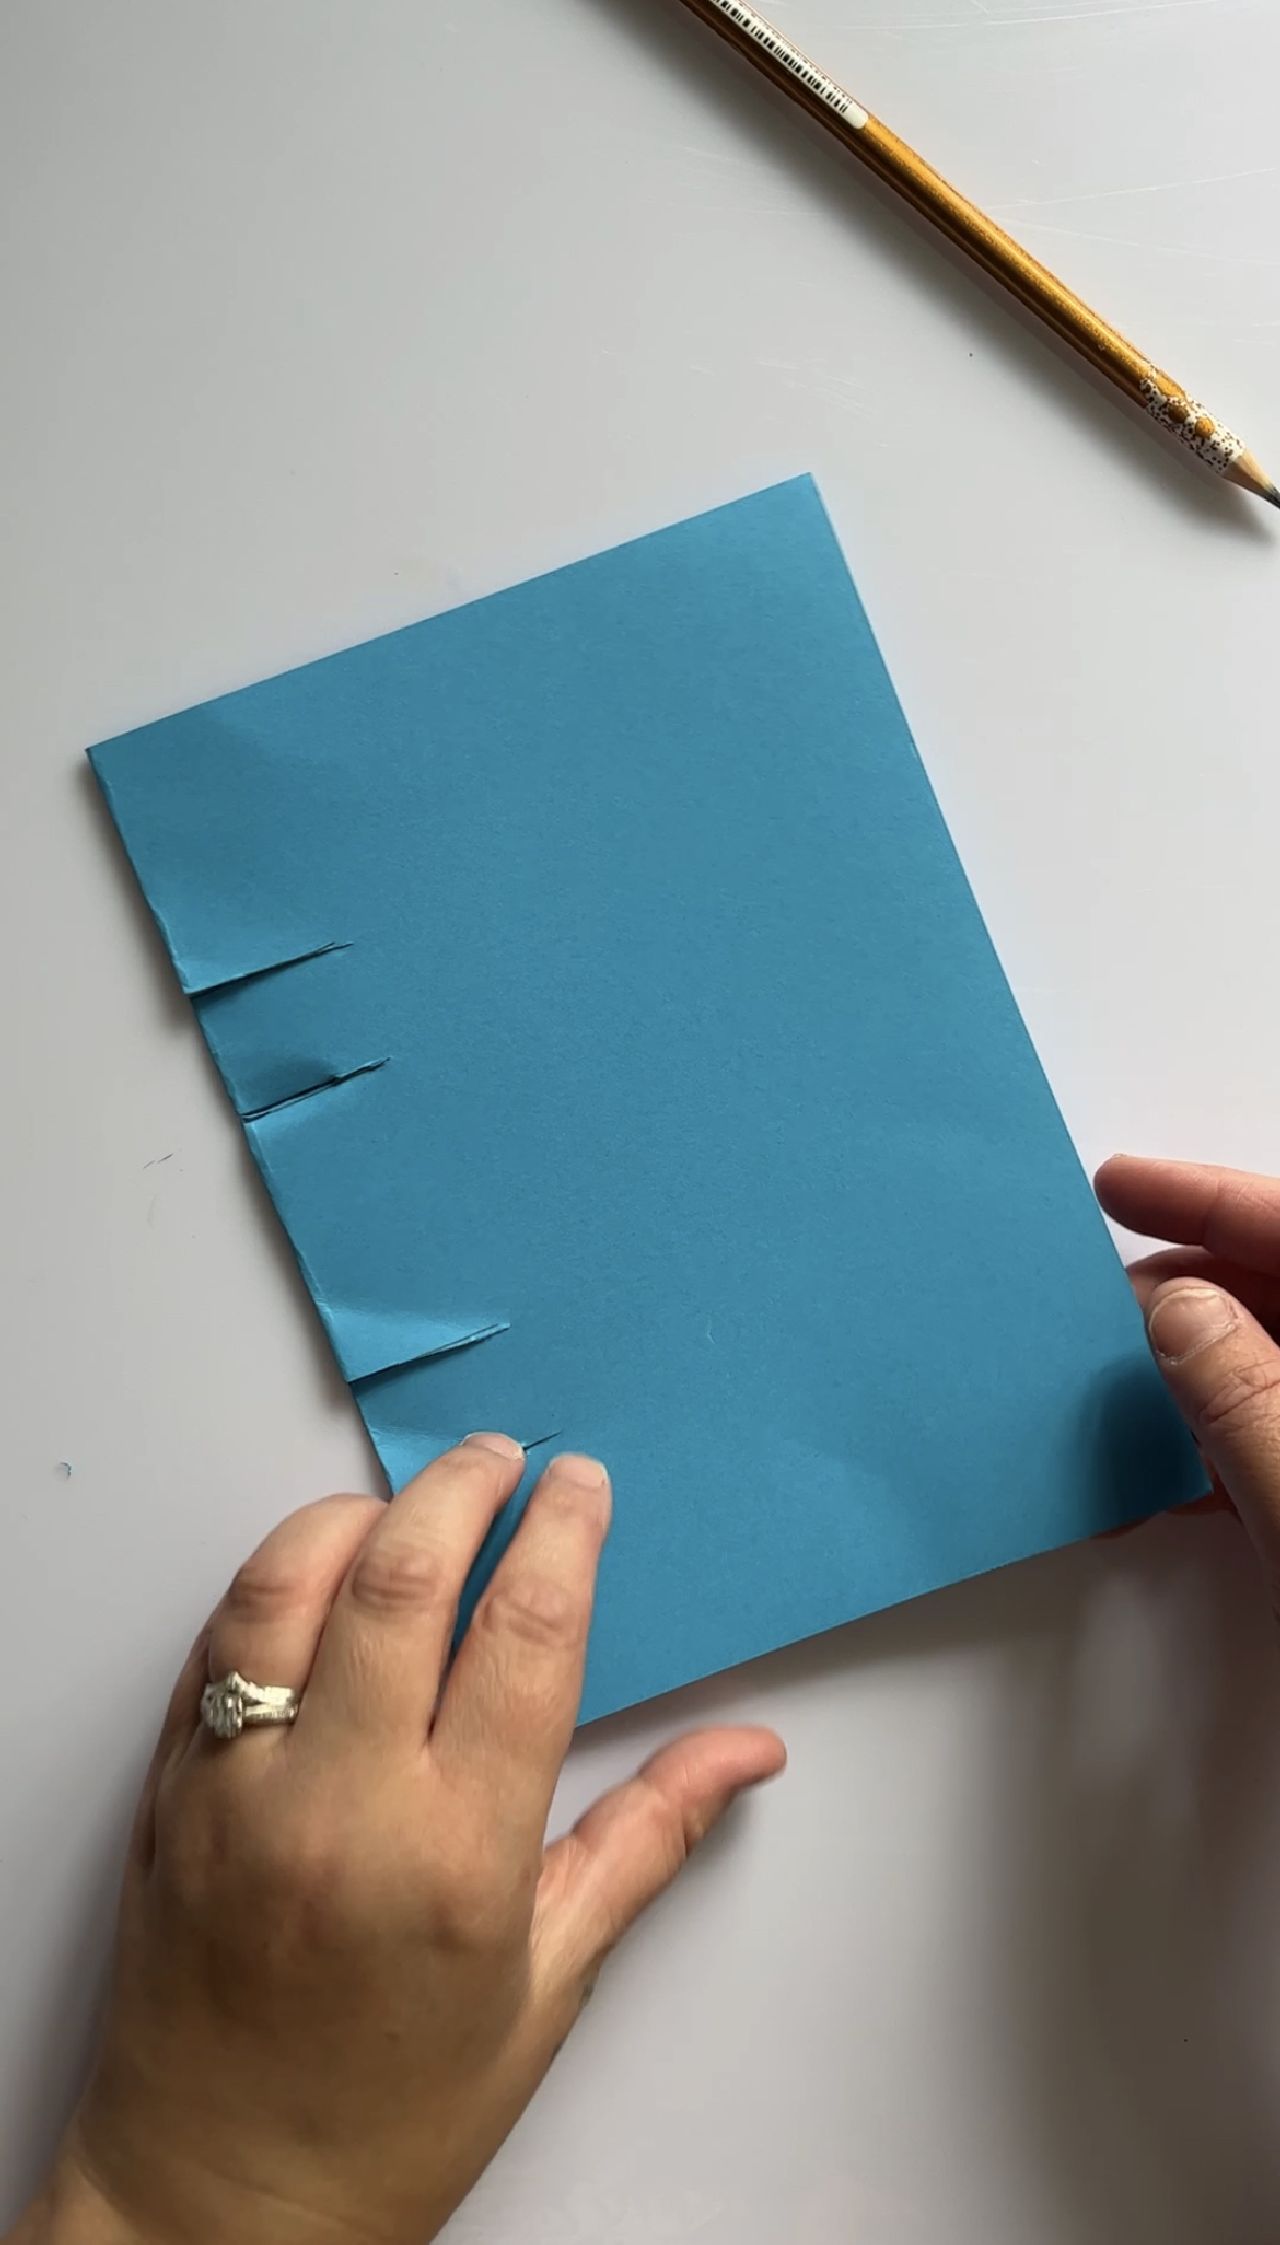 A folded sheet of blue paper laying on a desk